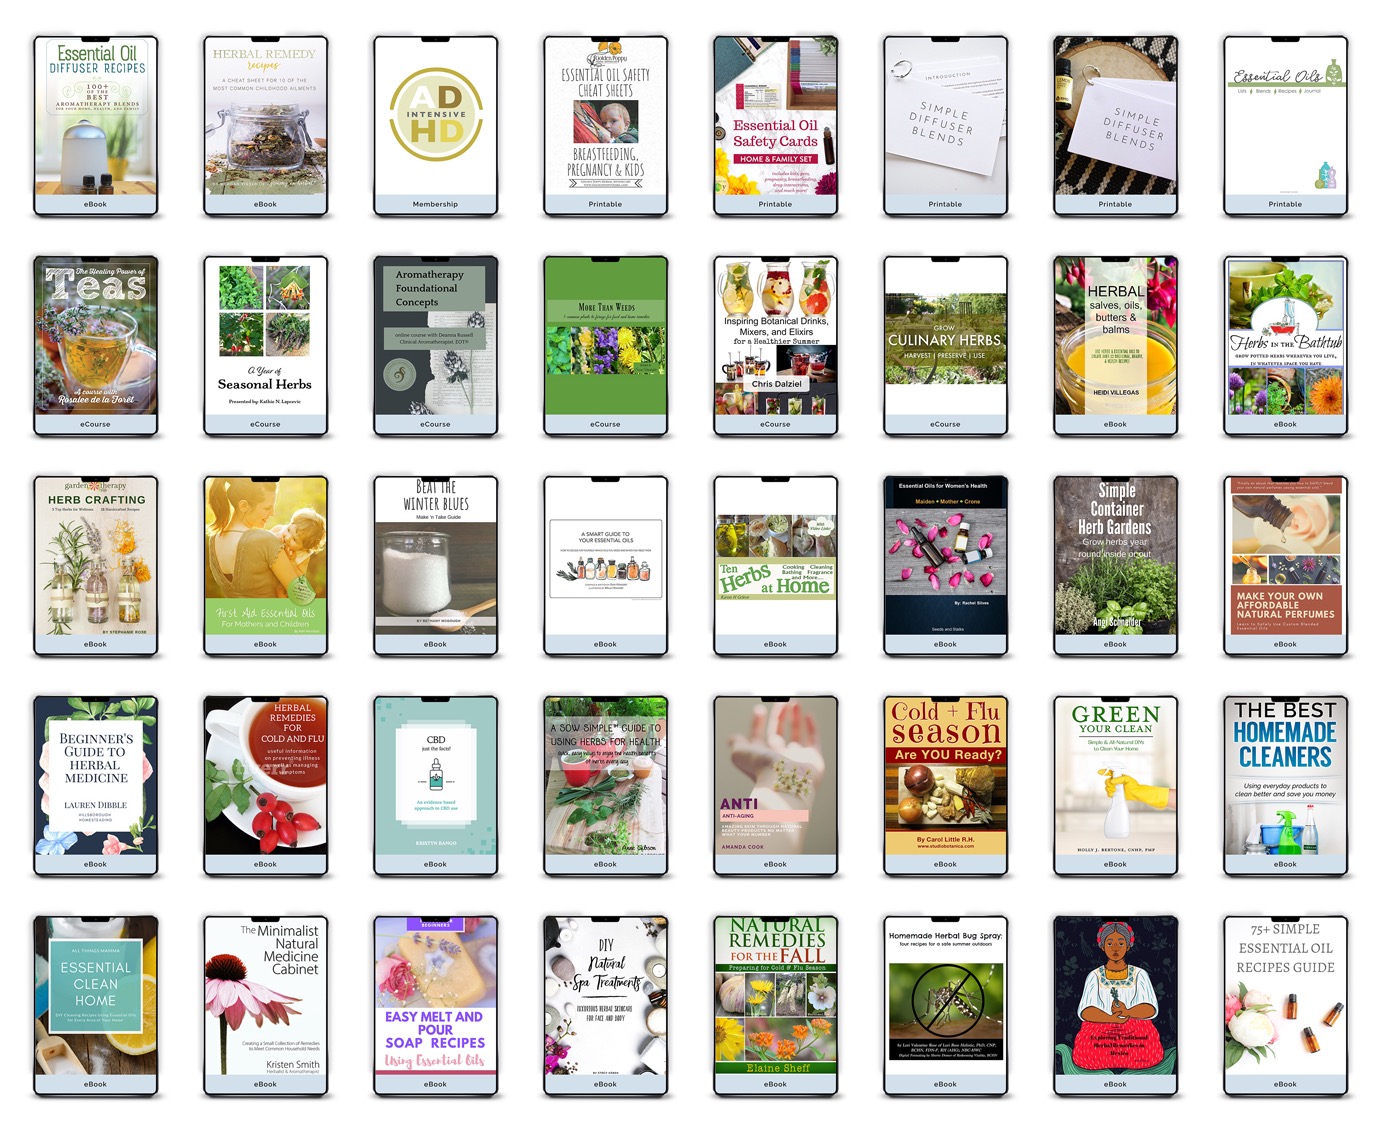 screenshot of 40 different eBooks sharing tips and remedies with herbs and essential oils